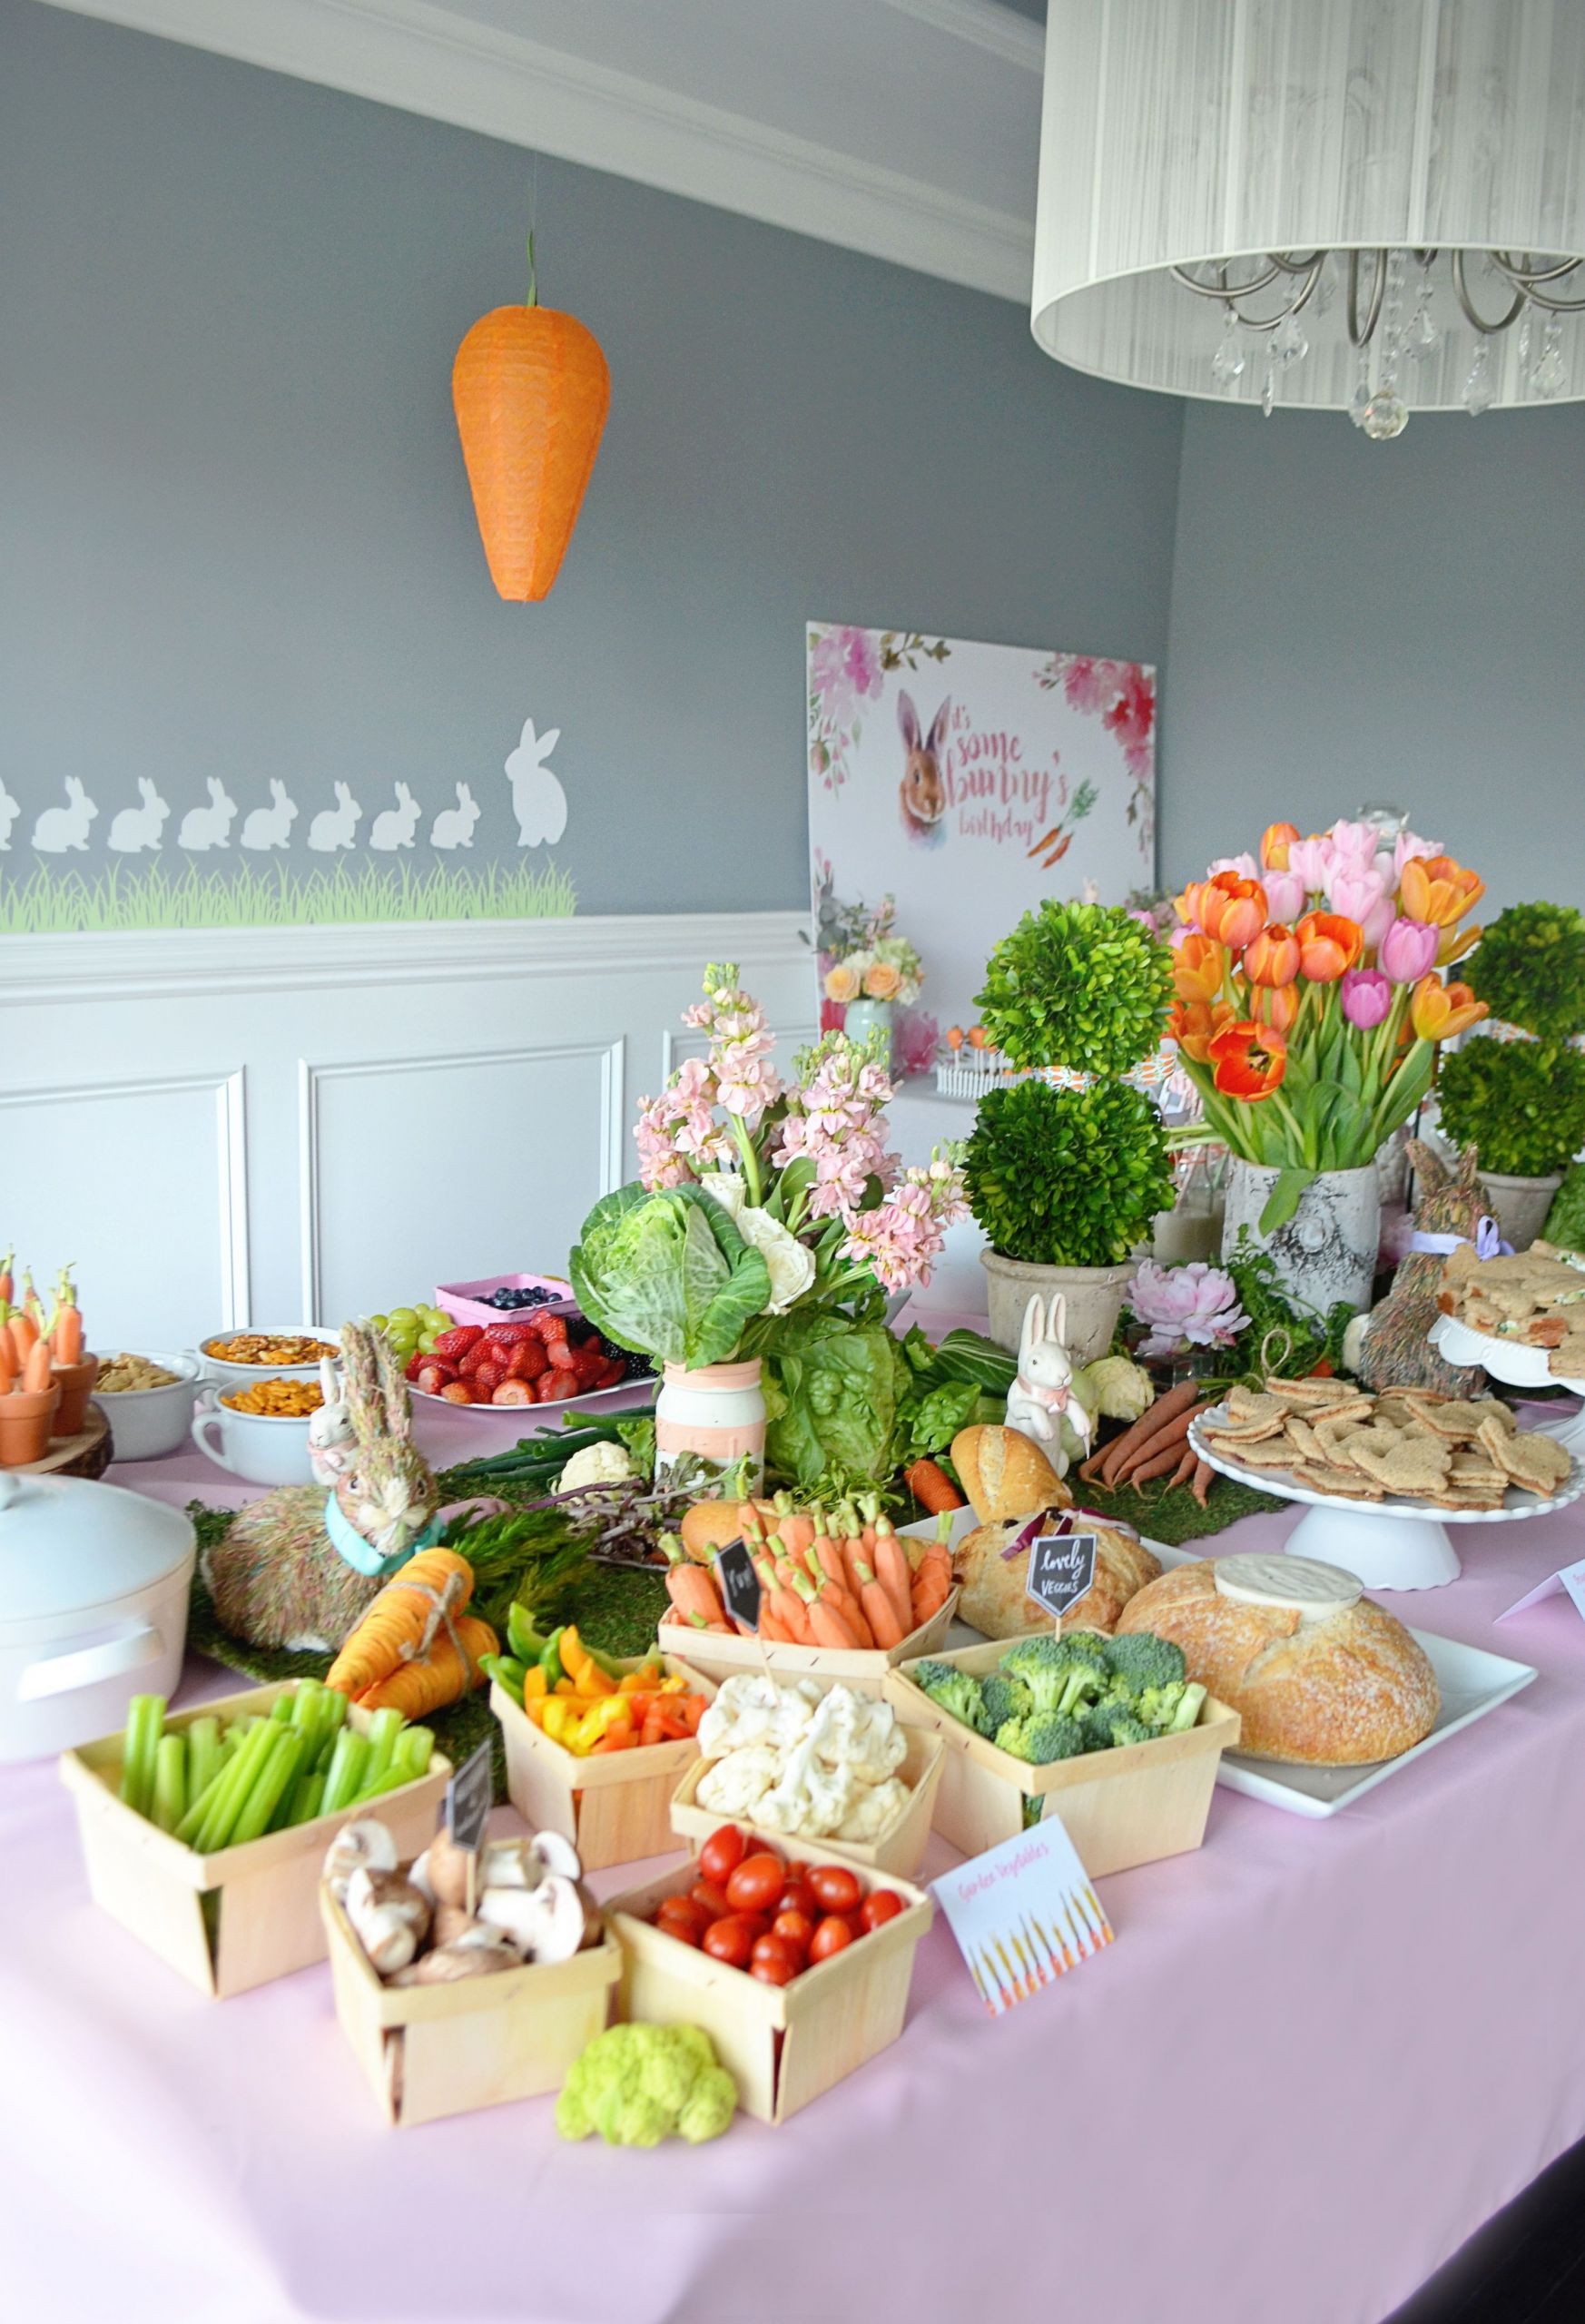 Party Ideas For Easter
 Shop the Party Bunny Themed Party Easter